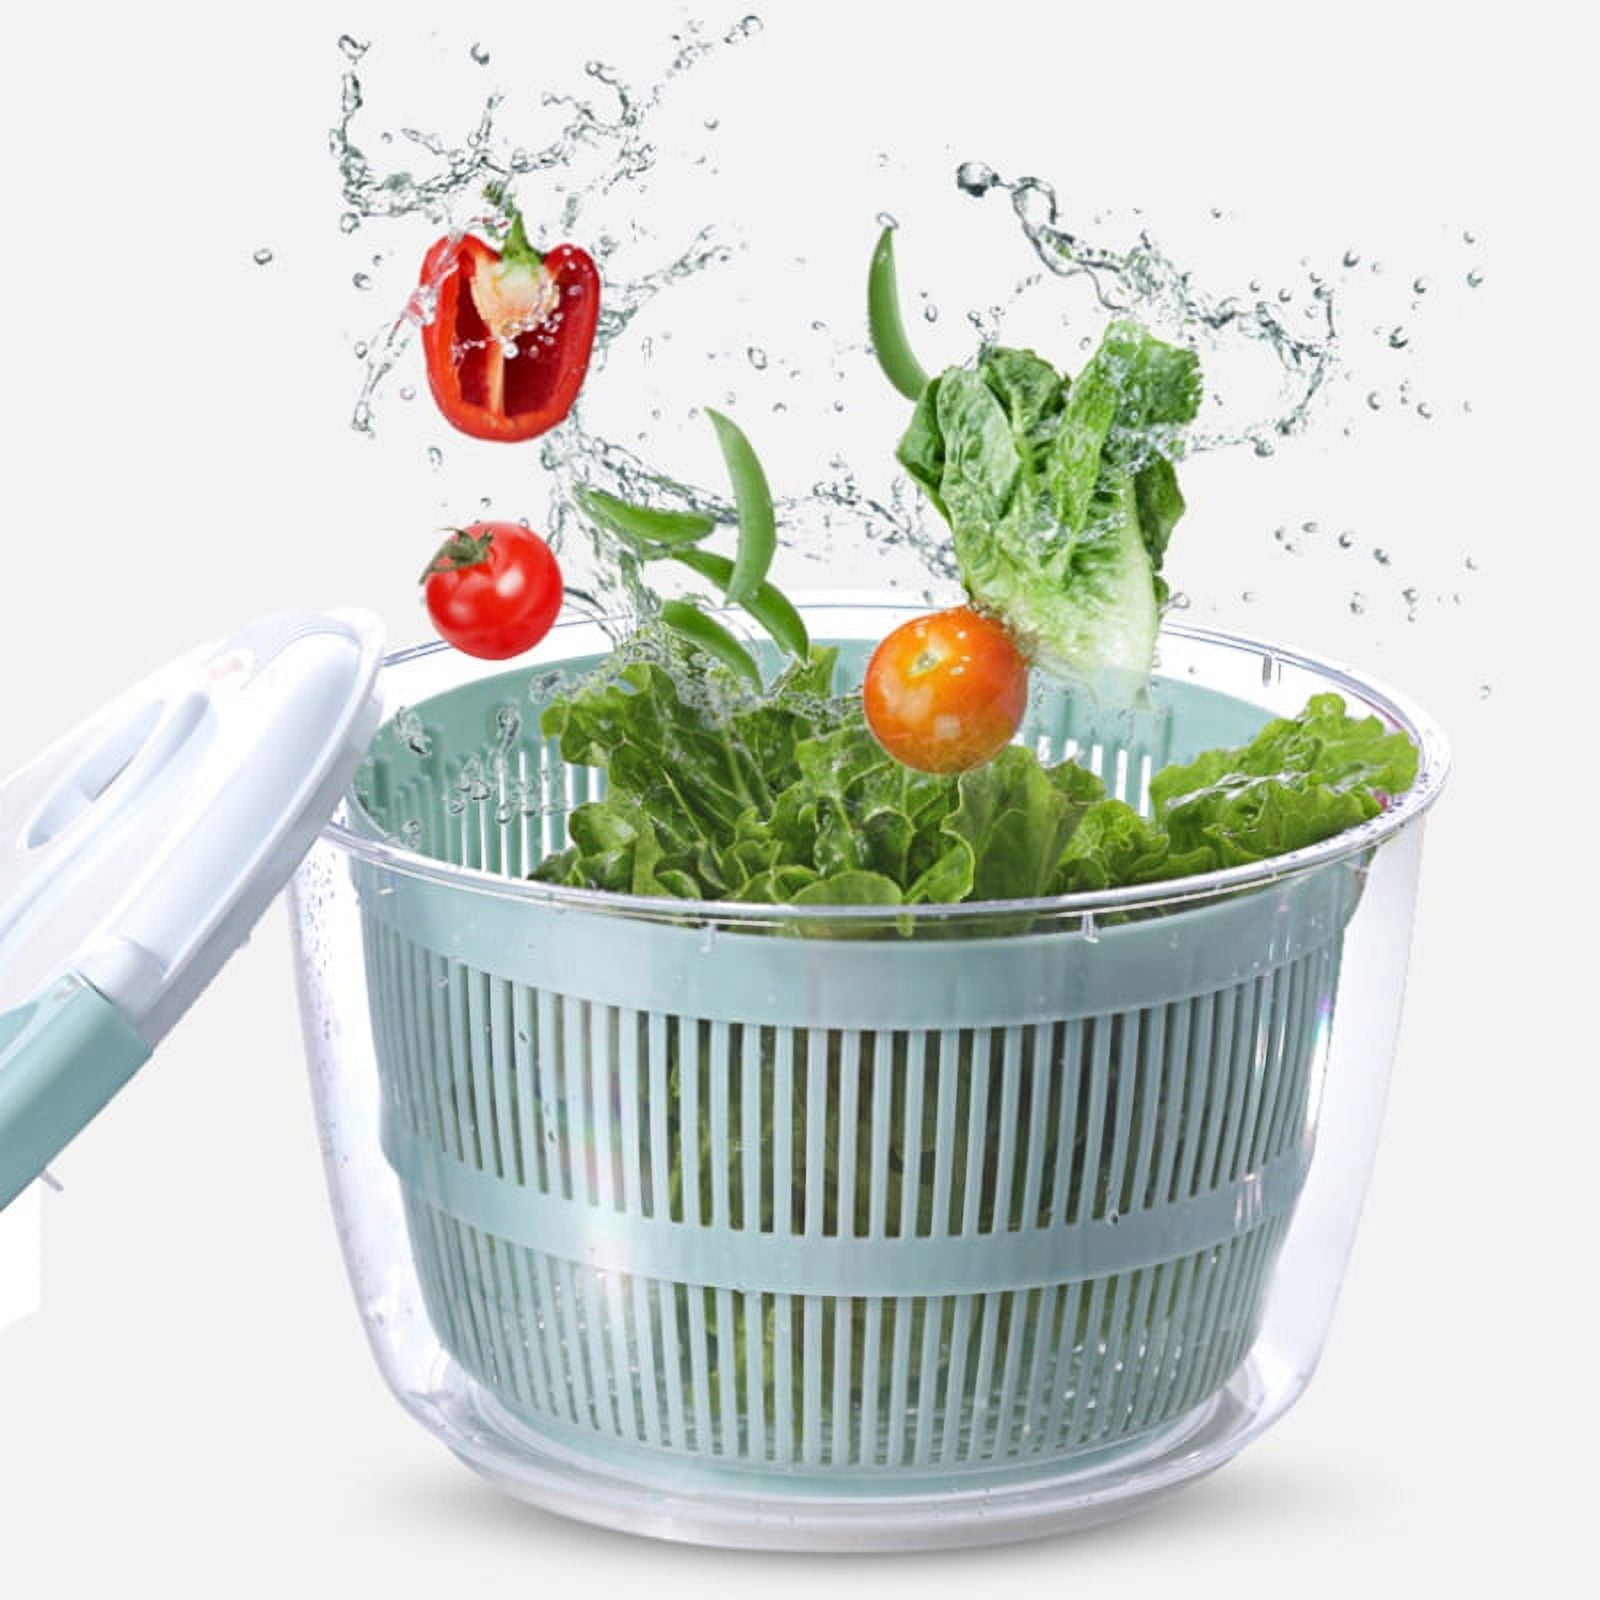 Kitchen Salad Spinner Large 5L Capacity - Manual Lettuce Spinner with  Secure Lid Lock & Rotary Handle - Easy To Use Salad Spinners with Bowl,  Colander & Built-in Draining System (Green),Green,F111238 